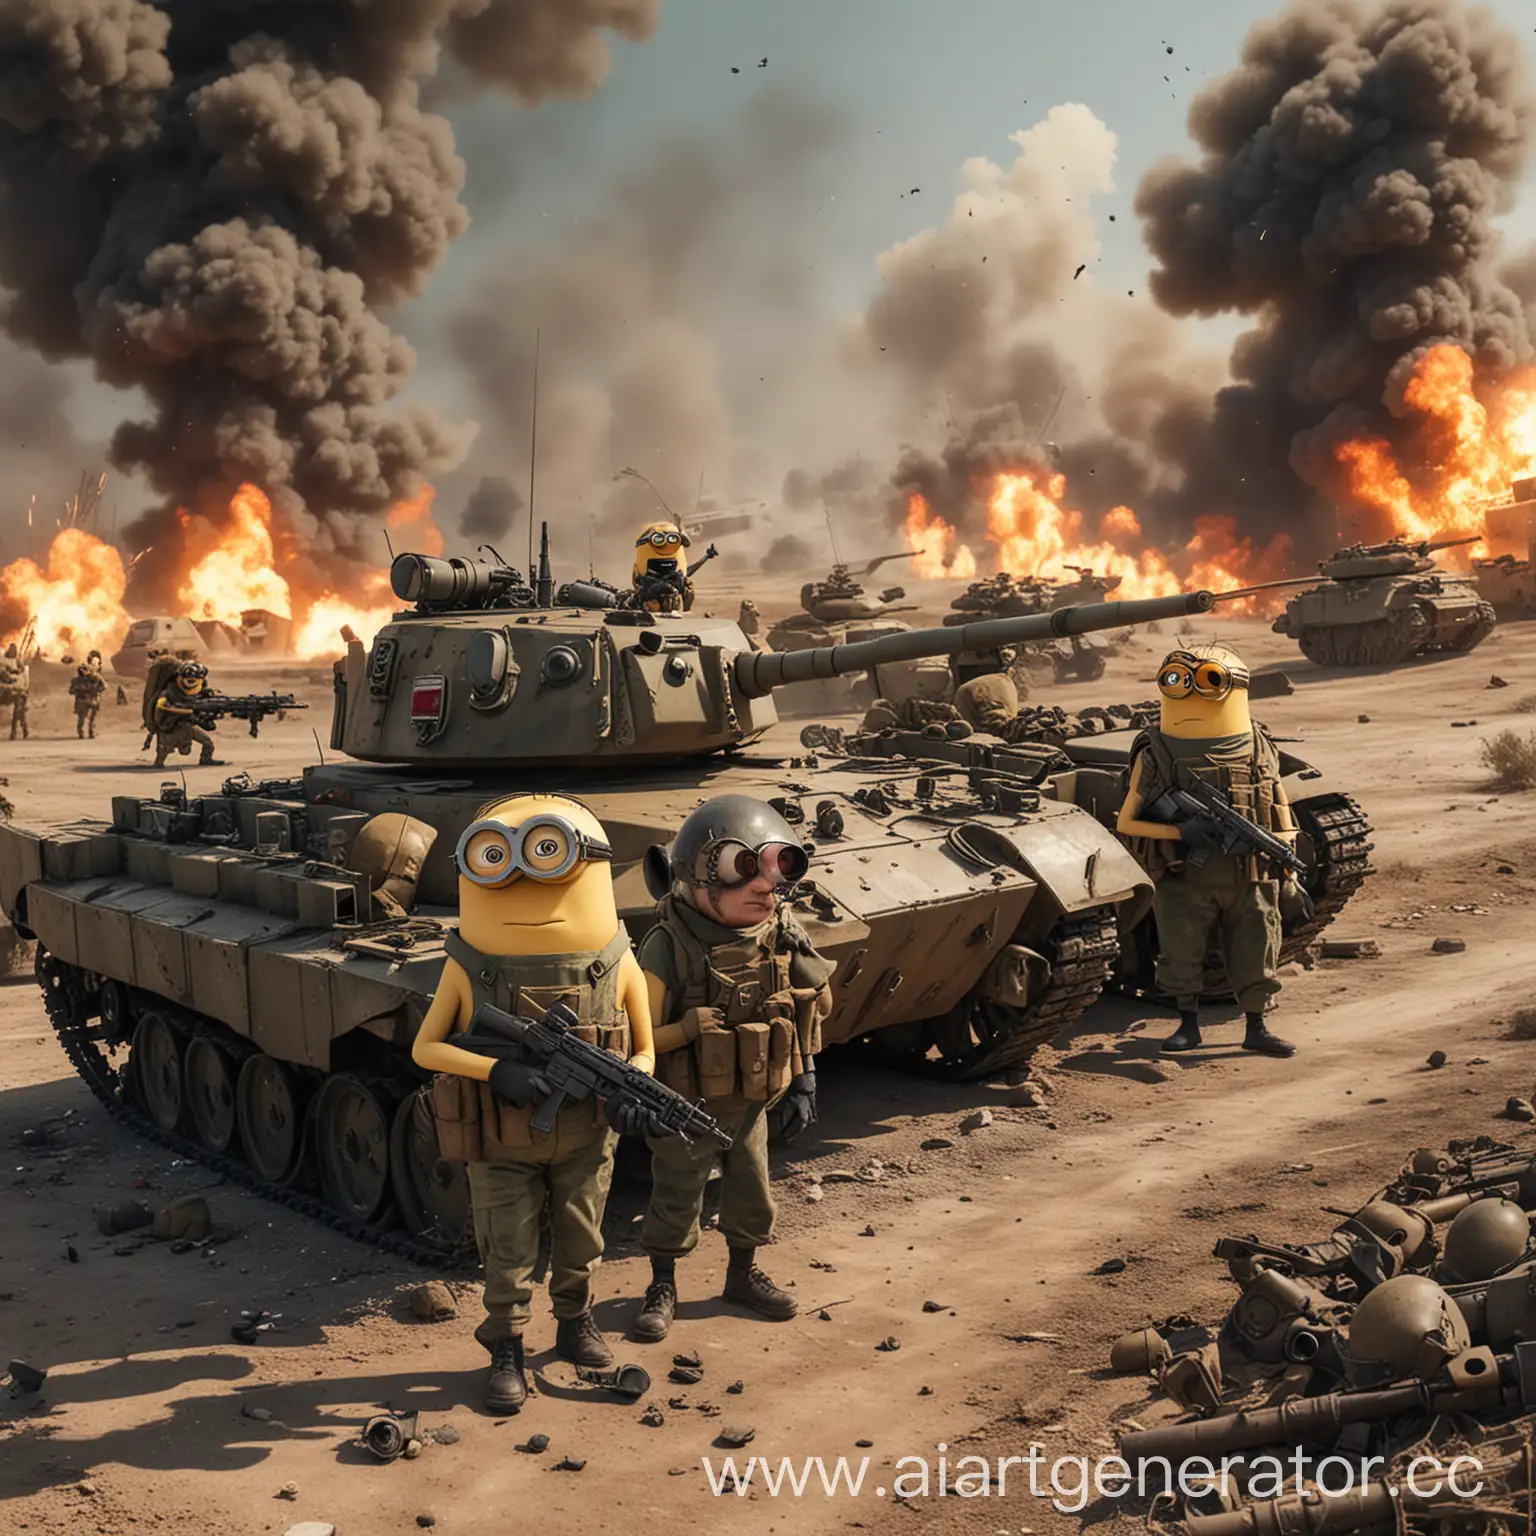 Minions-in-Military-Uniforms-with-Rifles-Beside-a-Tank-Amid-Explosions